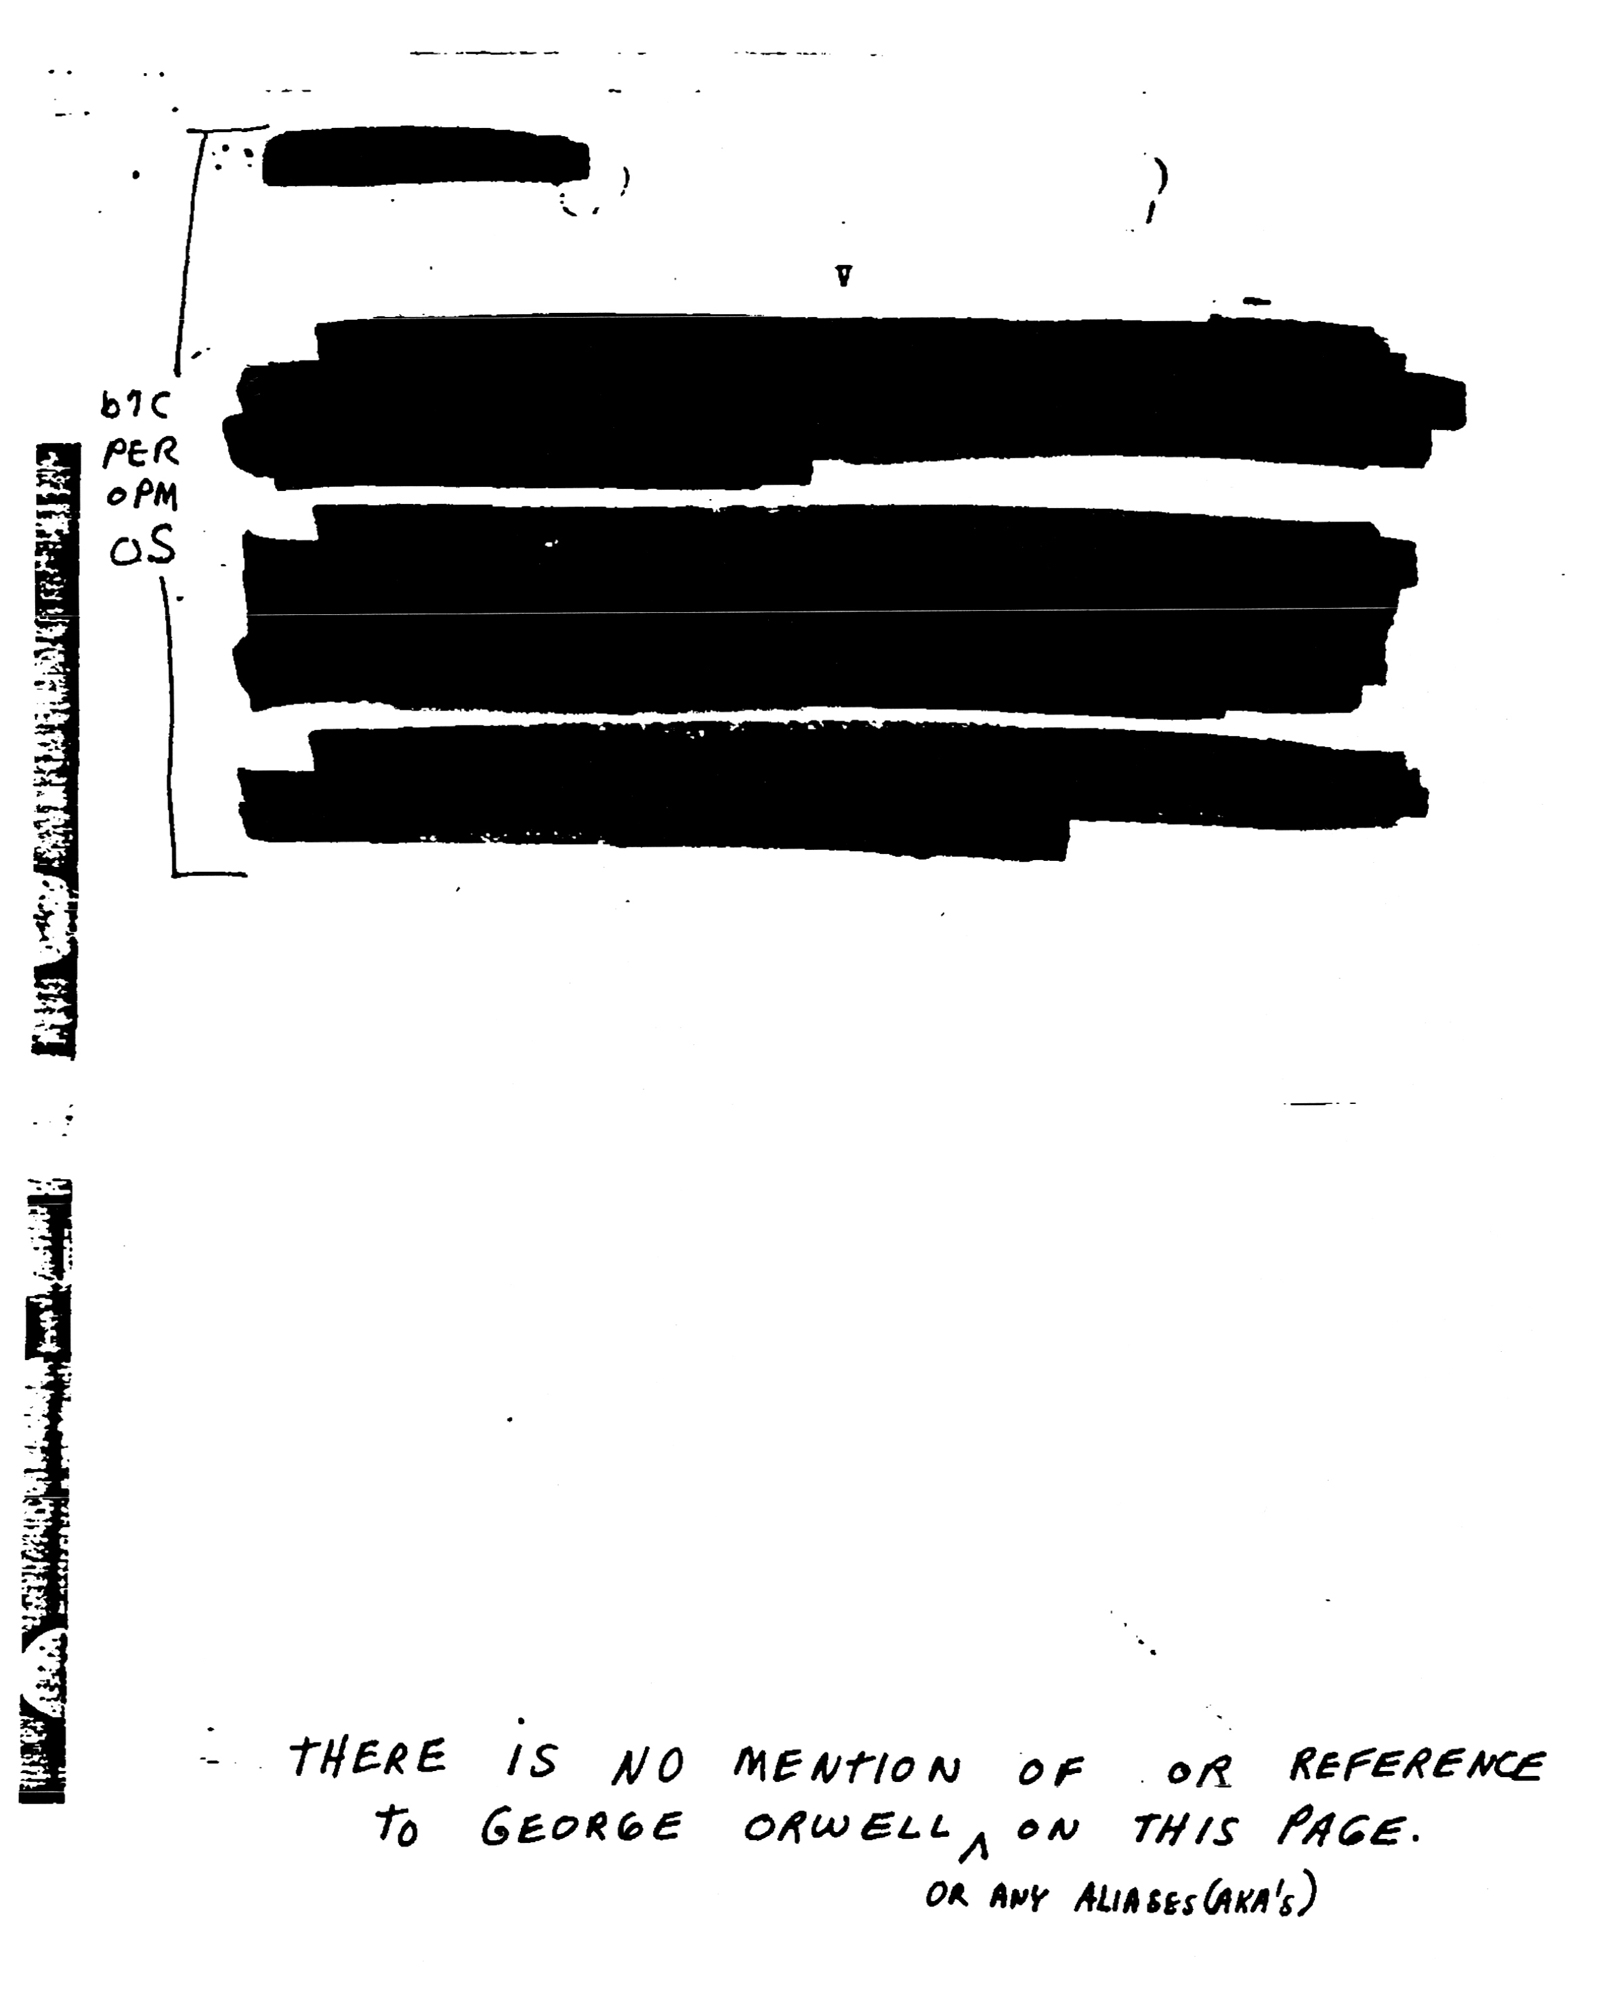 Photograph of a heavily redacted FBI document from nineteen fifty-nine on which can be read the following sentence: “There is no mention of or reference to George Orwell, or any aliases (a.k.a.s) on this page.”